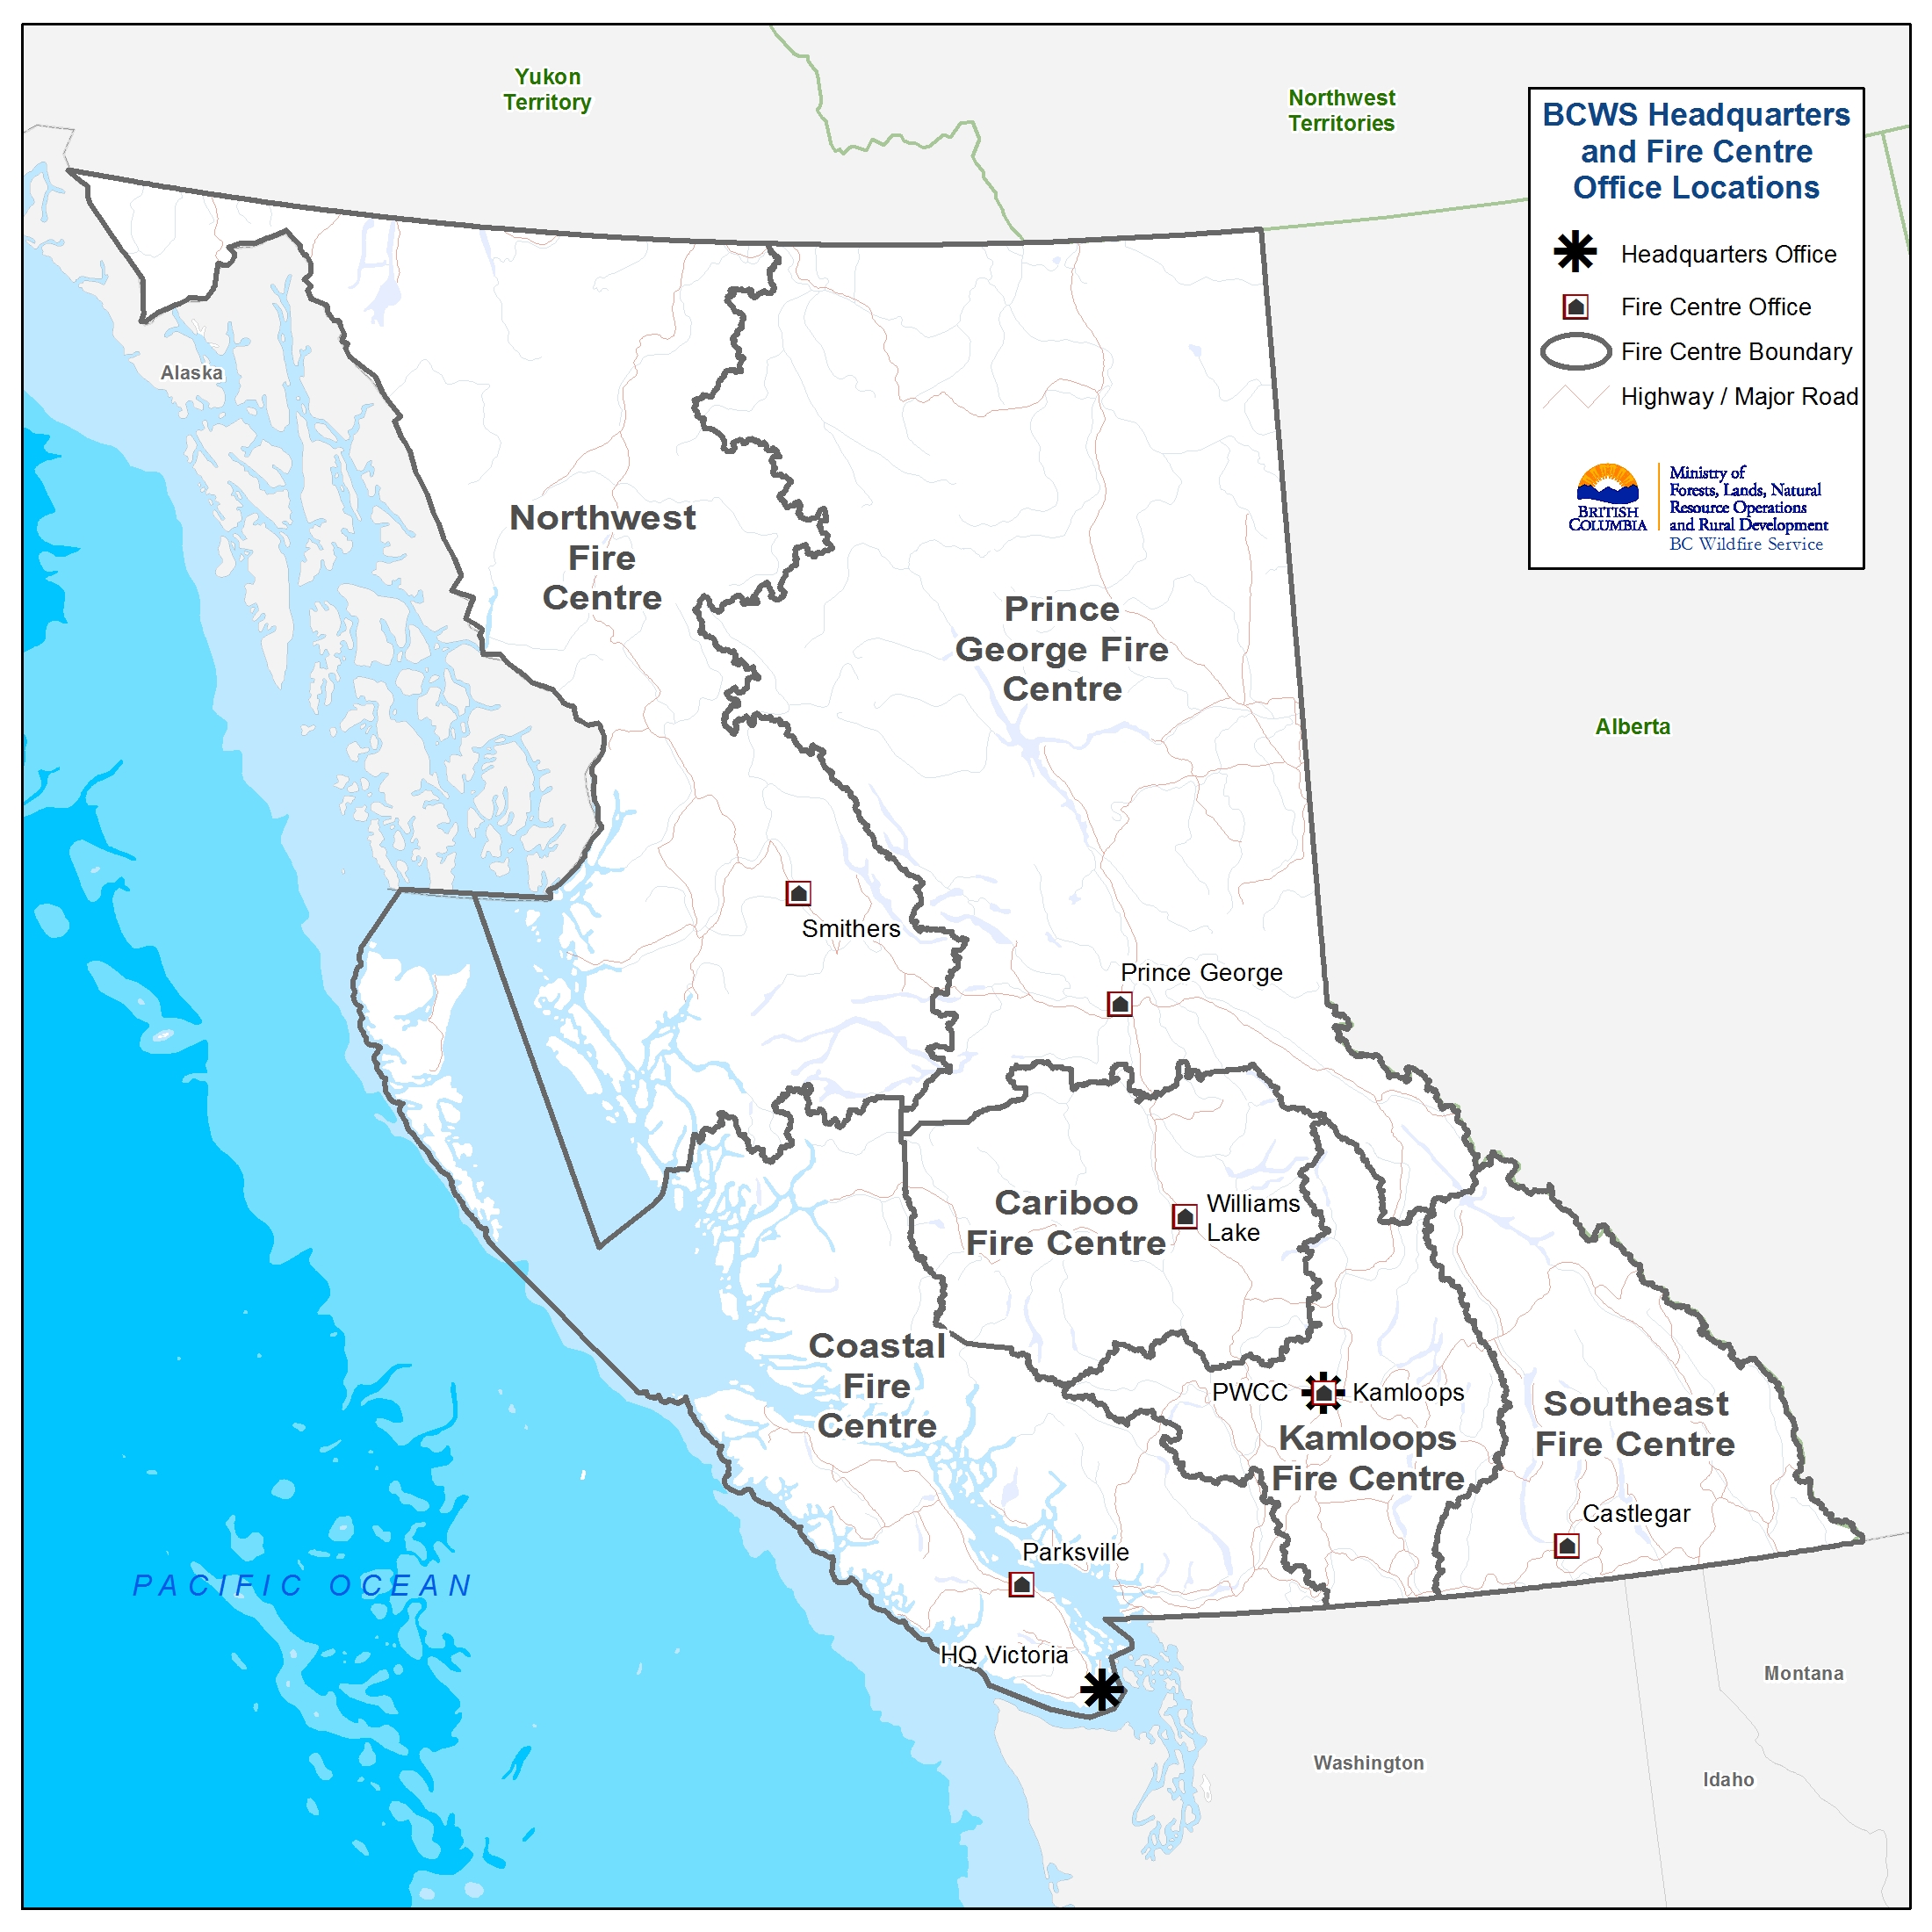 See a map of B.C.'s regional fire centre